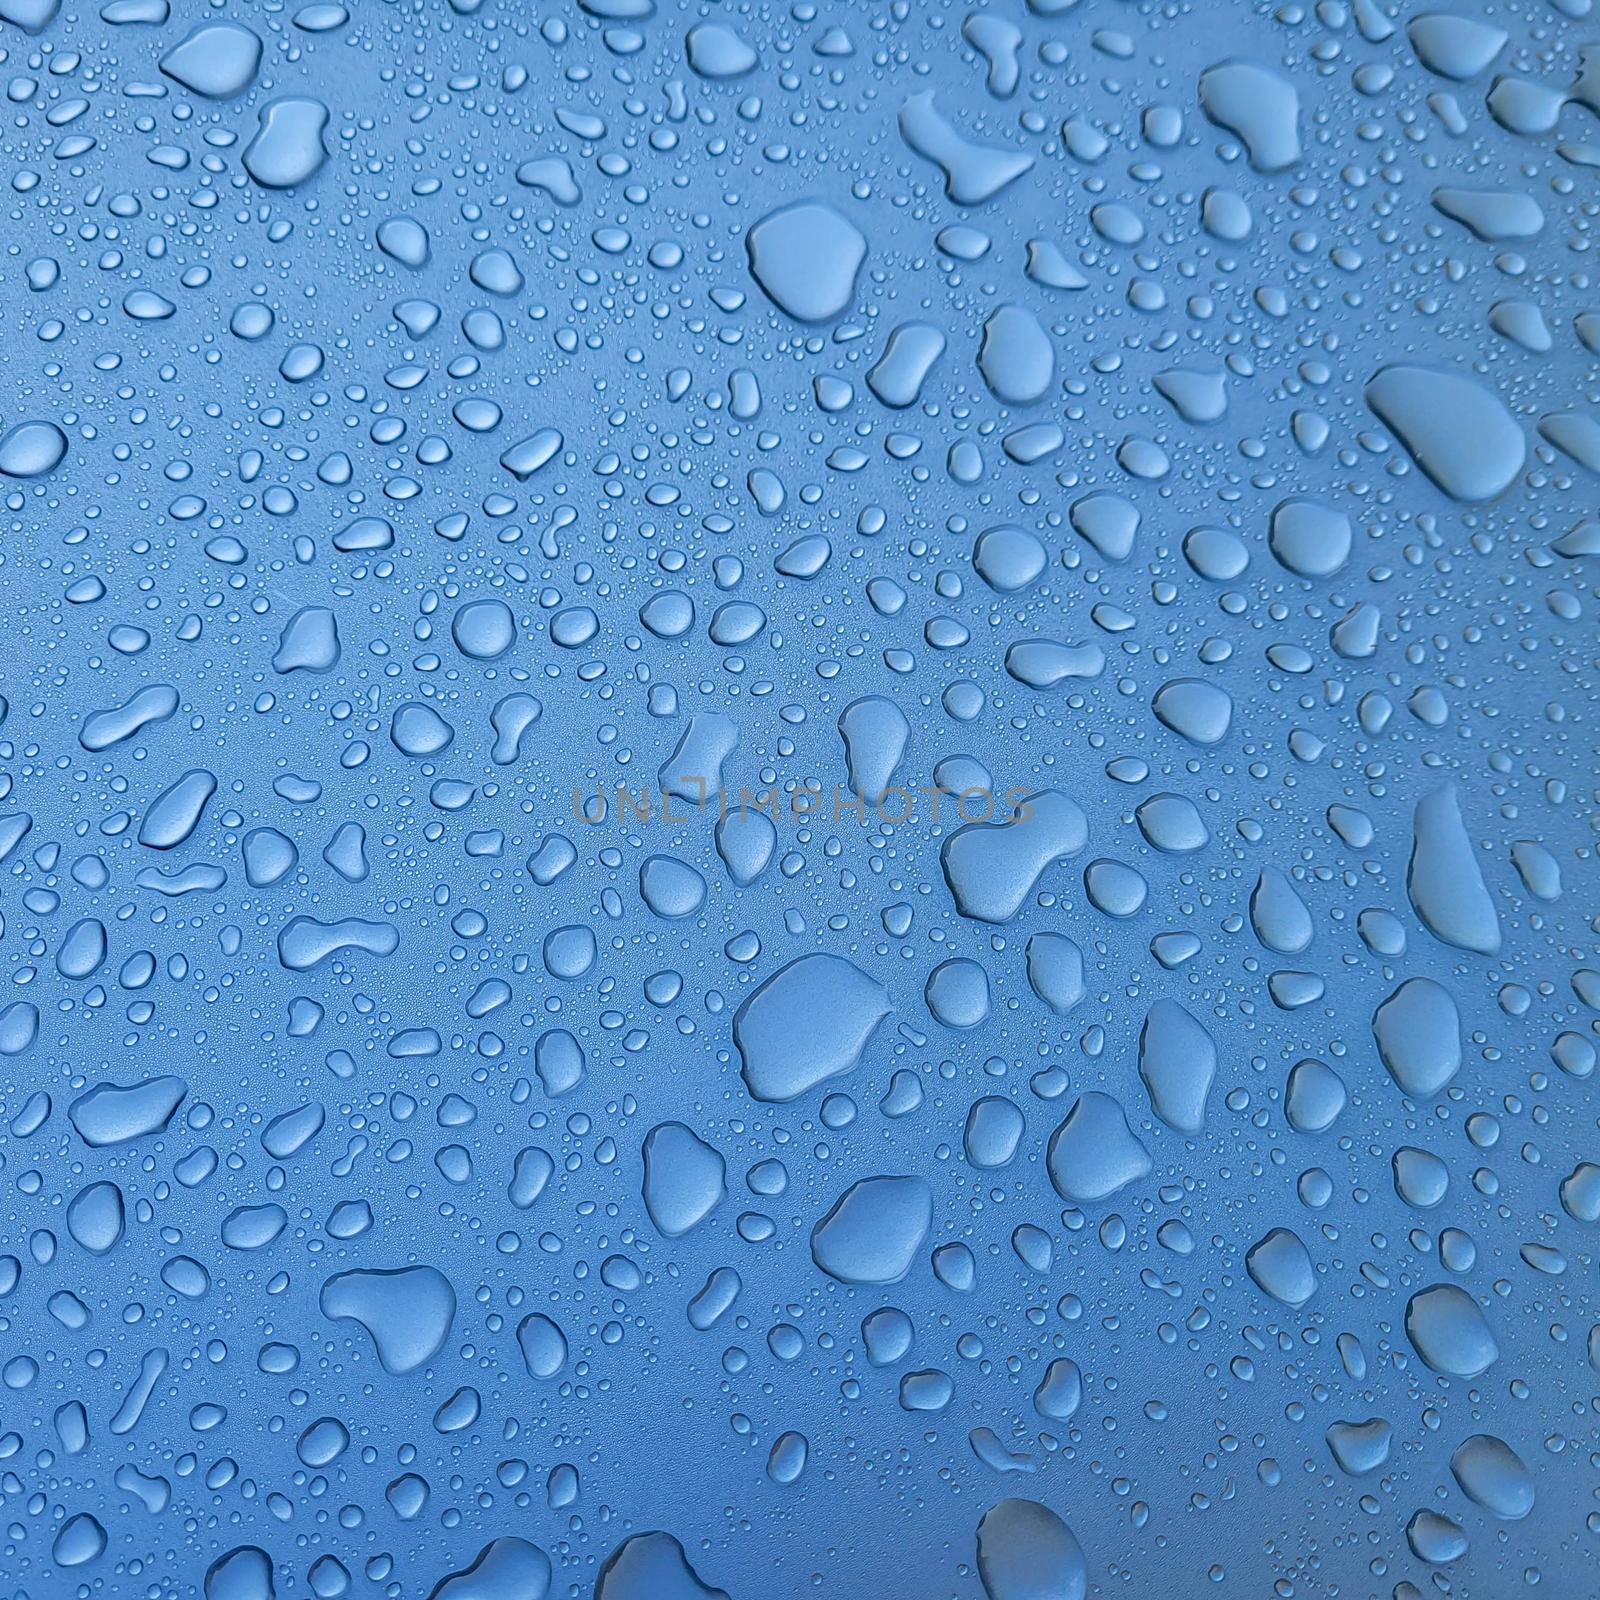 A drop of water on the hood of the car. Water beads after rain or car wash on blue paint surface